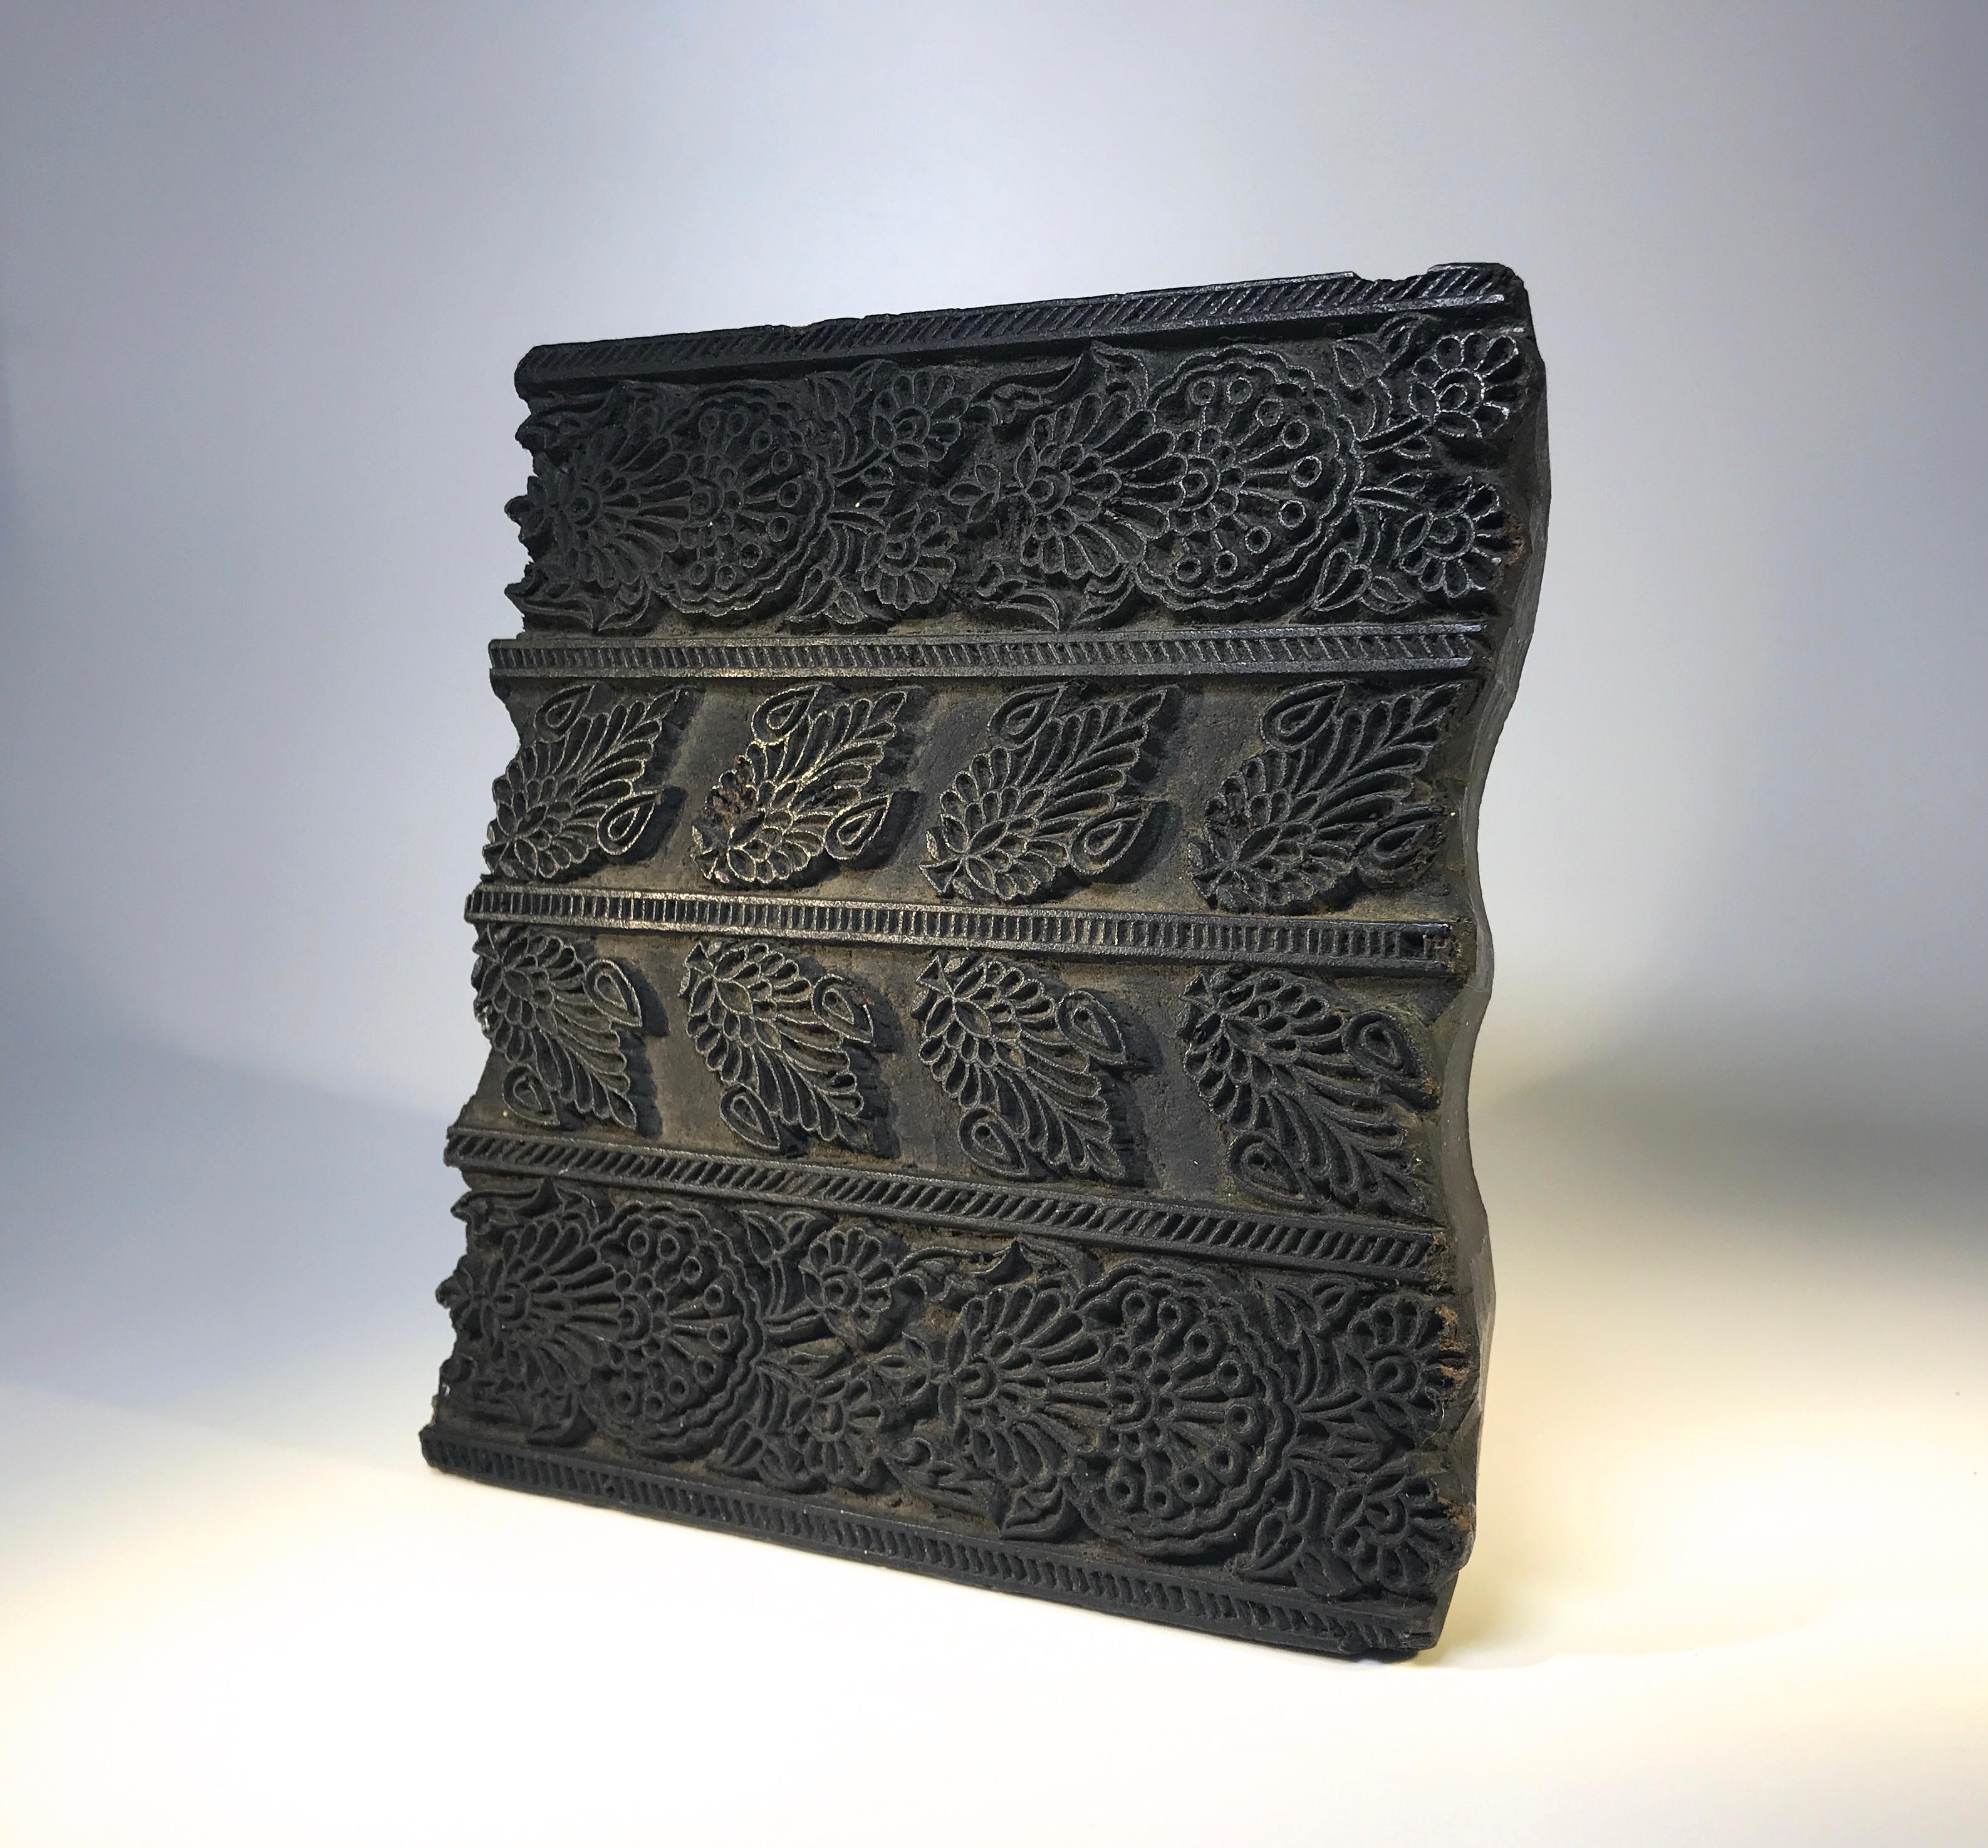 Splendid intricately hand carved large heavyweight wooden square printing block from Asia
Traditionally used for hand held block printing ink or dye to textiles and paper
Fully functional or purely decorative,
circa 1970s
Measures: Height 6